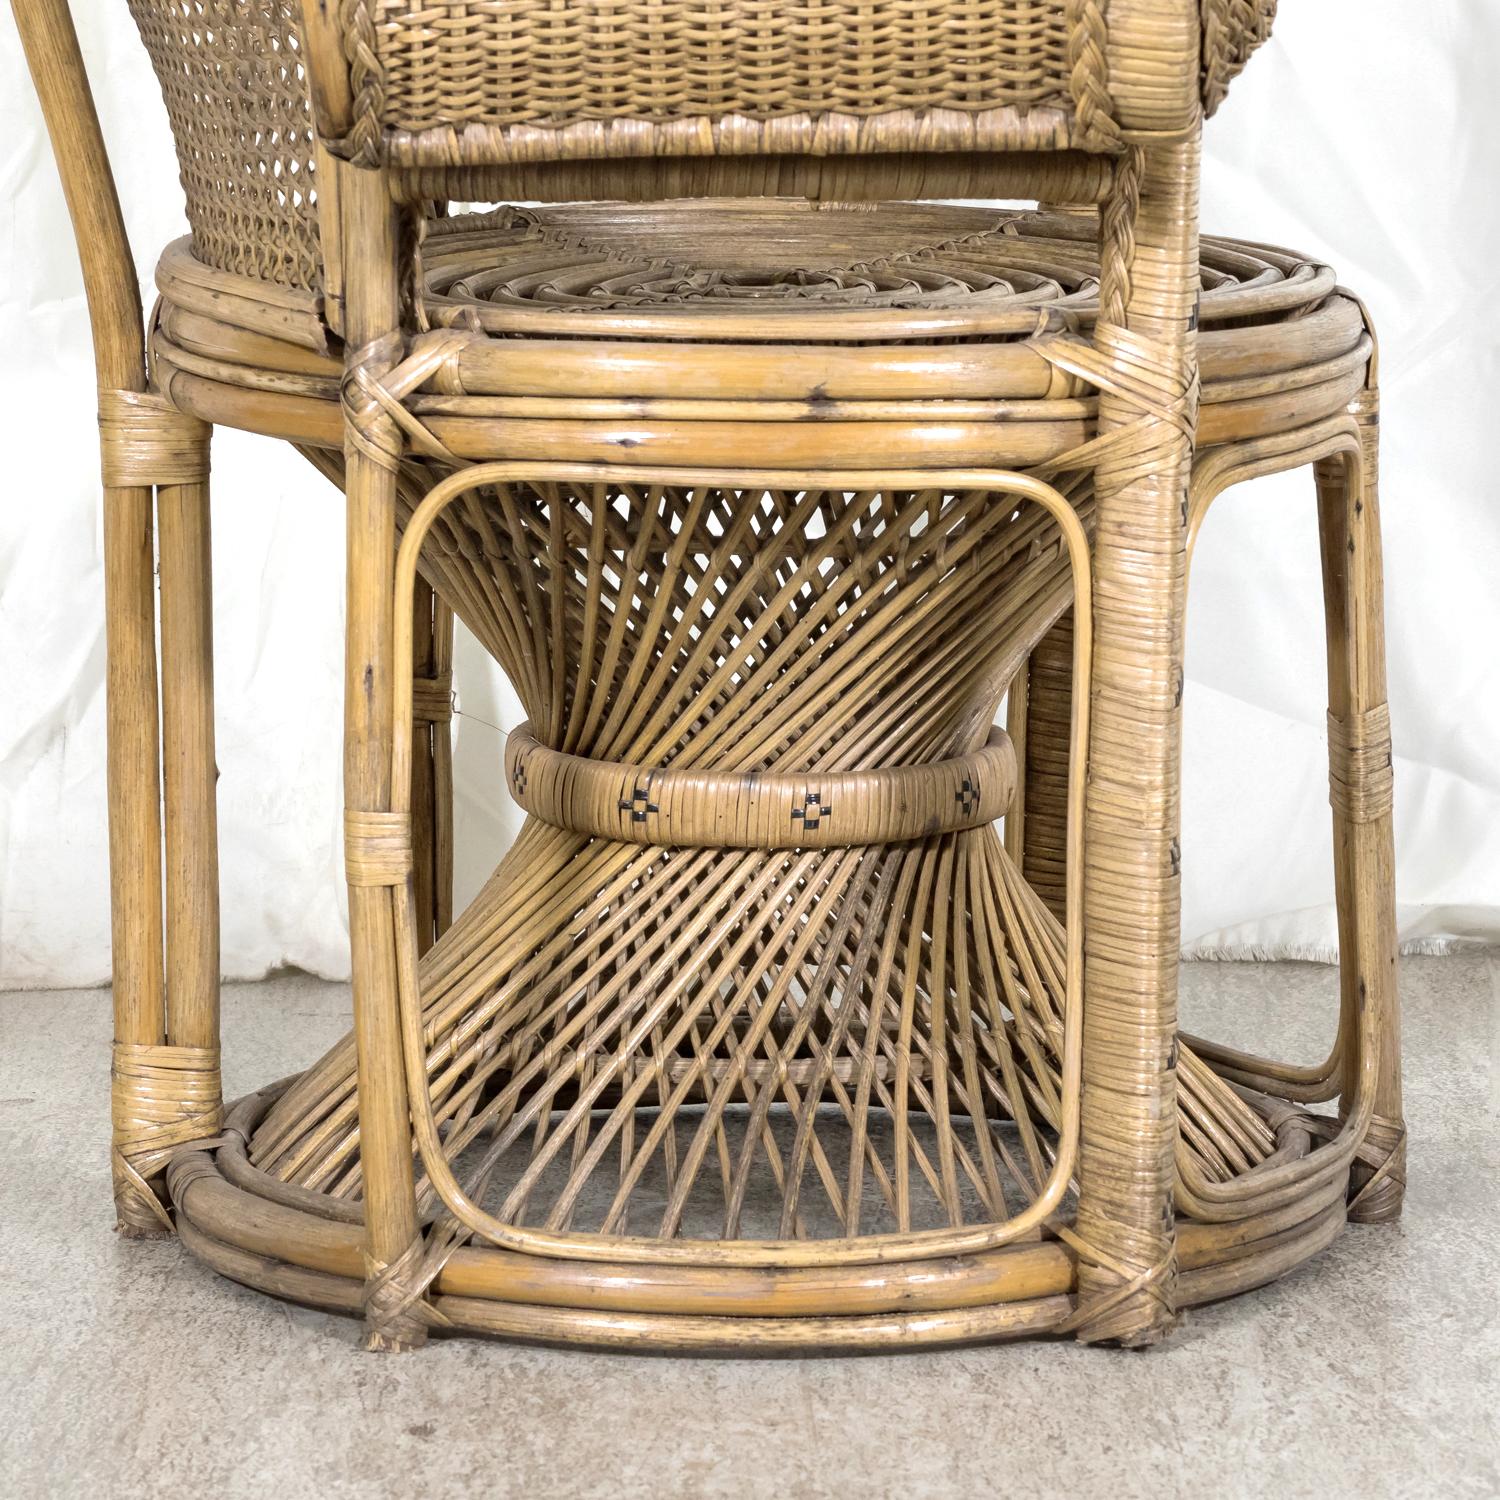 Rare 1930s French Wicker Rattan Emmanuelle Peacock Chair For Sale 11